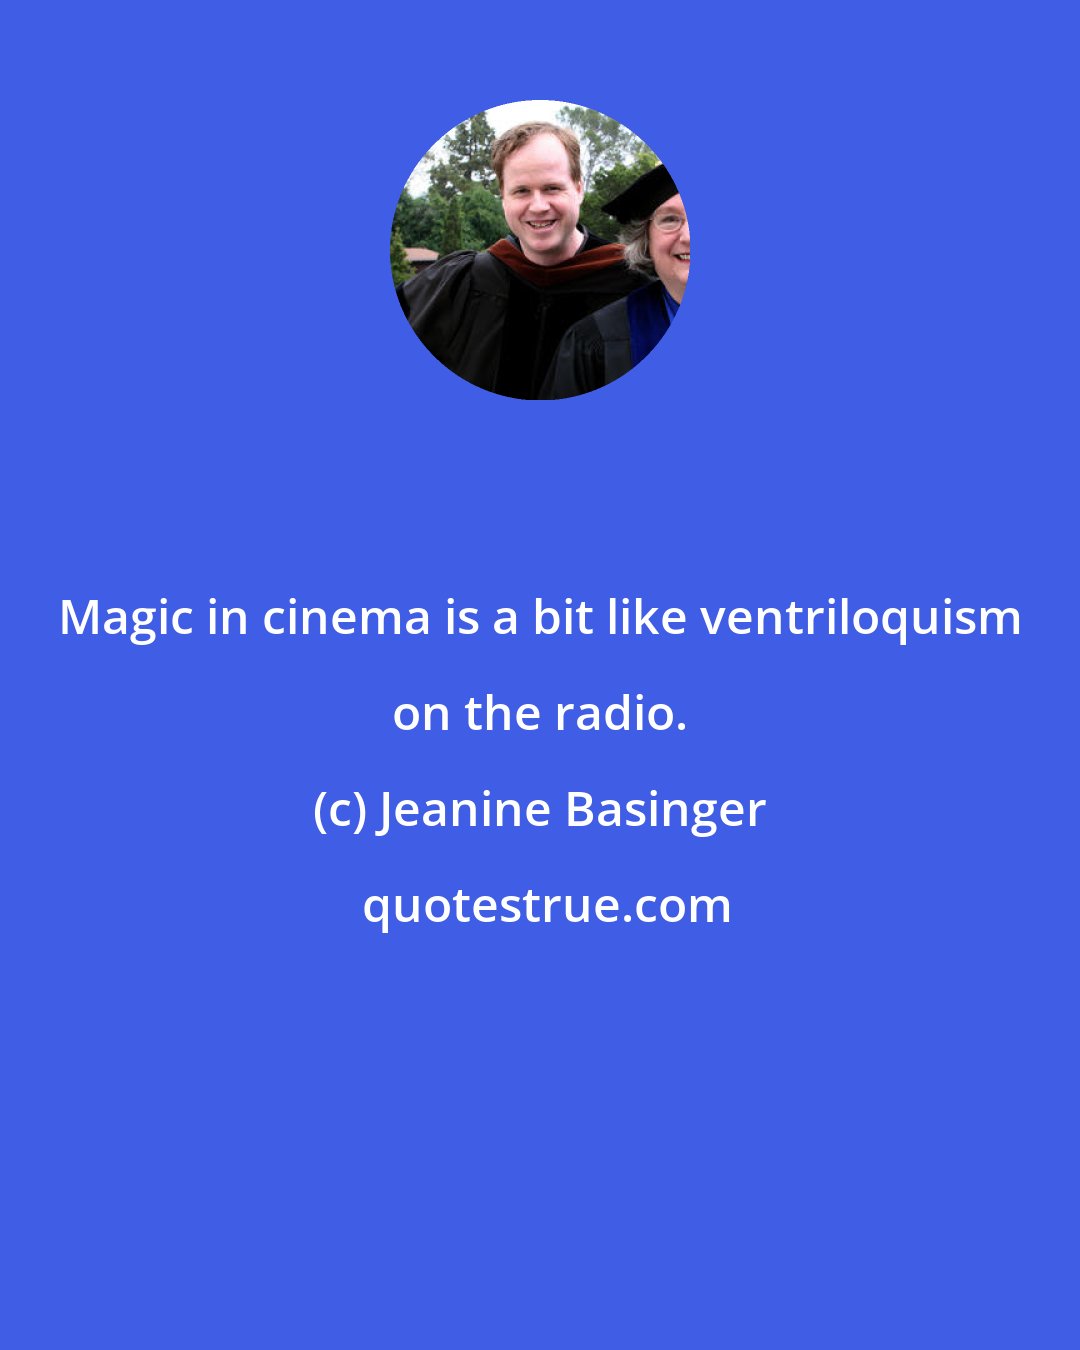 Jeanine Basinger: Magic in cinema is a bit like ventriloquism on the radio.